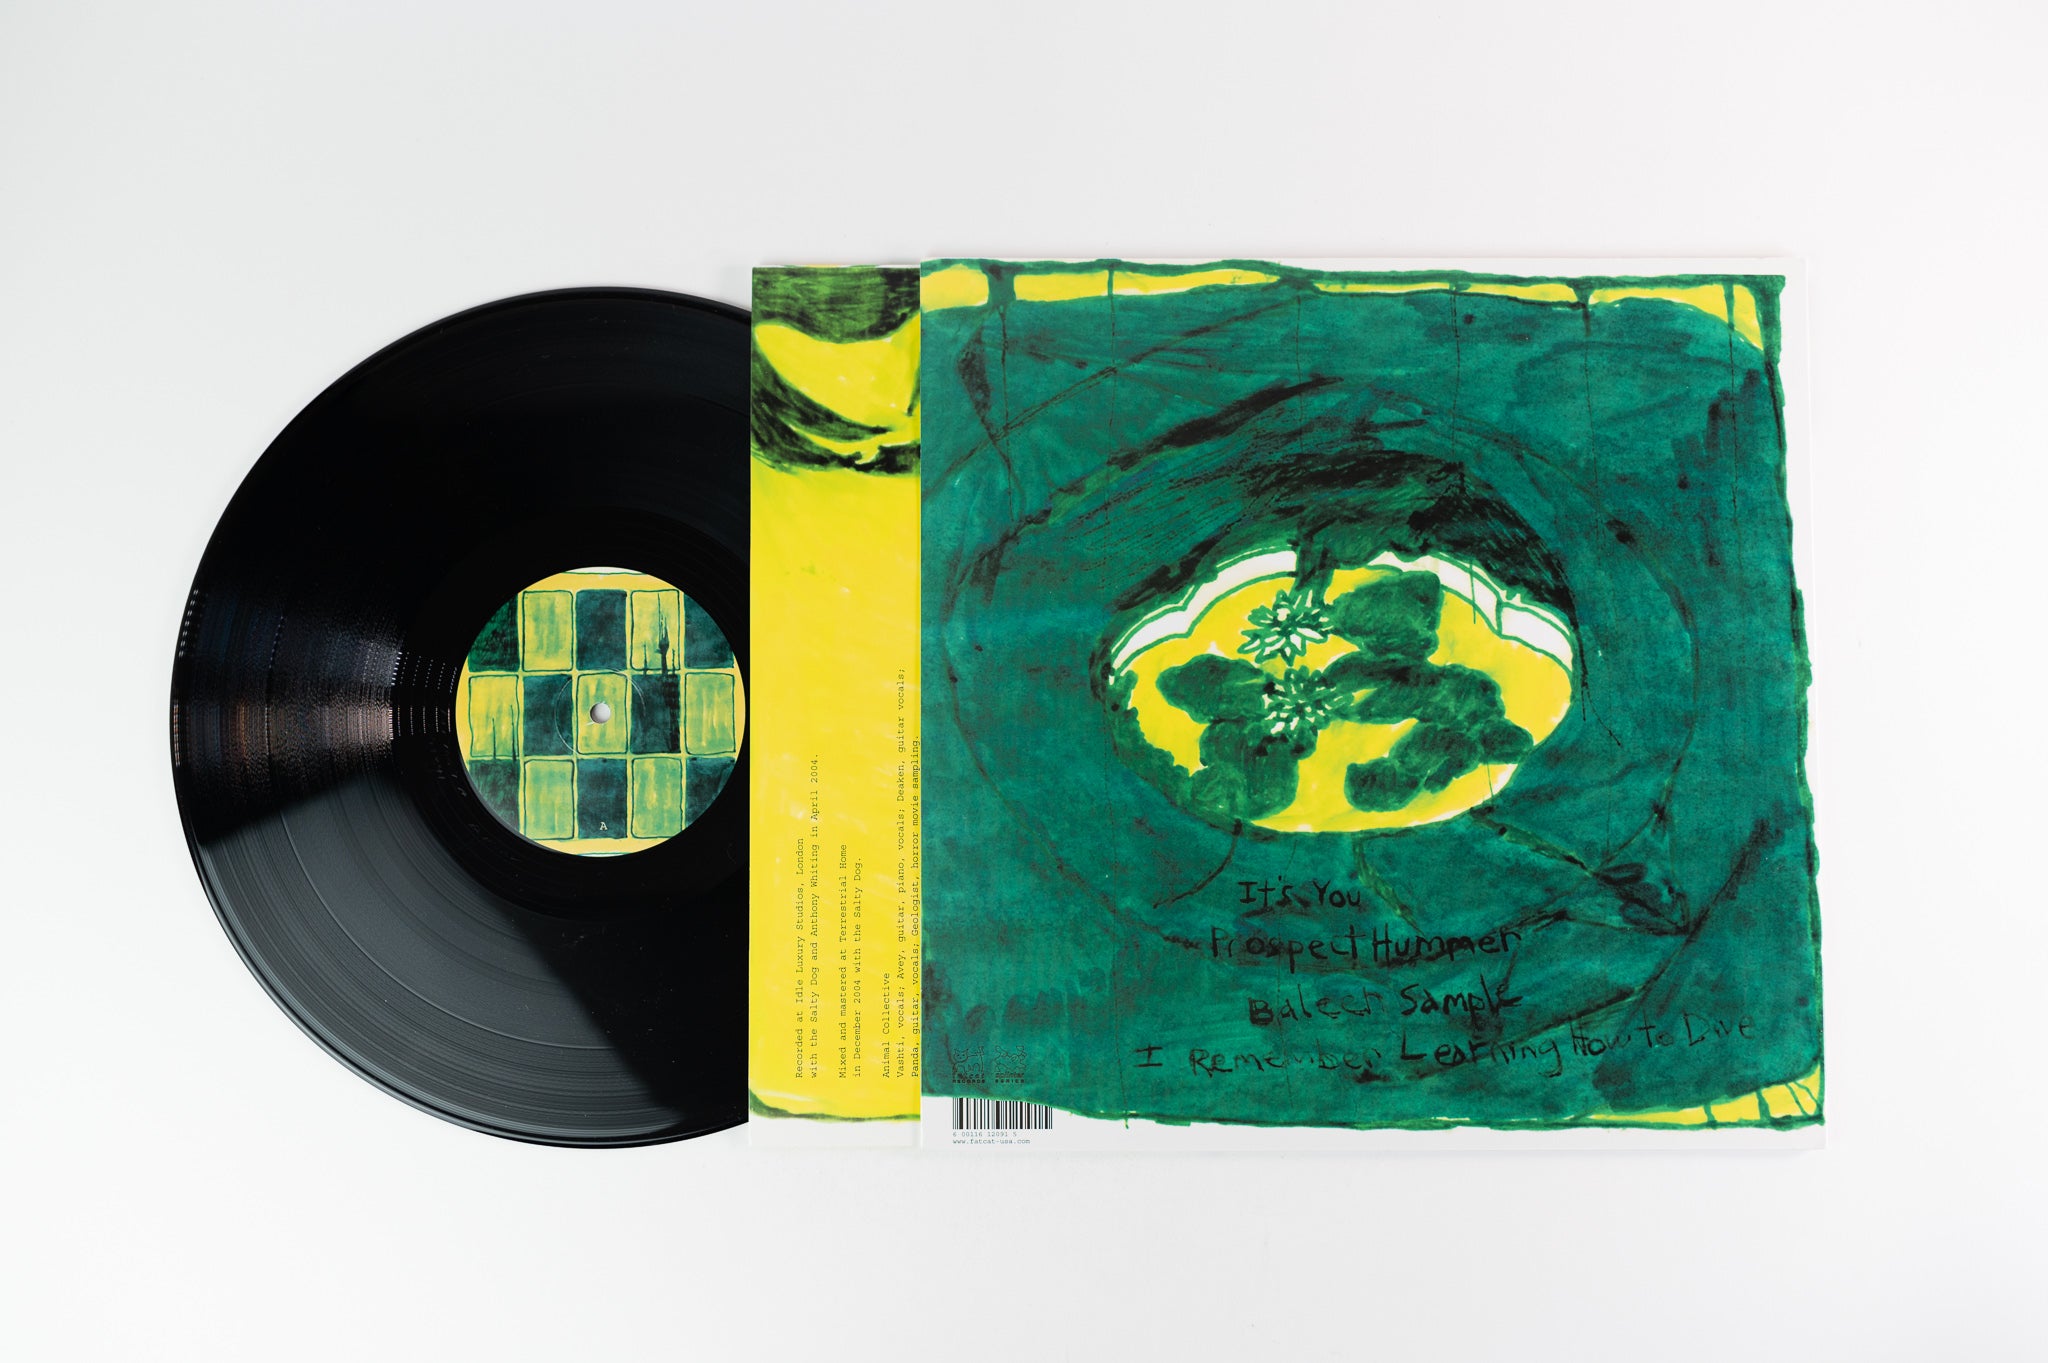 Animal Collective - Prospect Hummer on FatCat Records